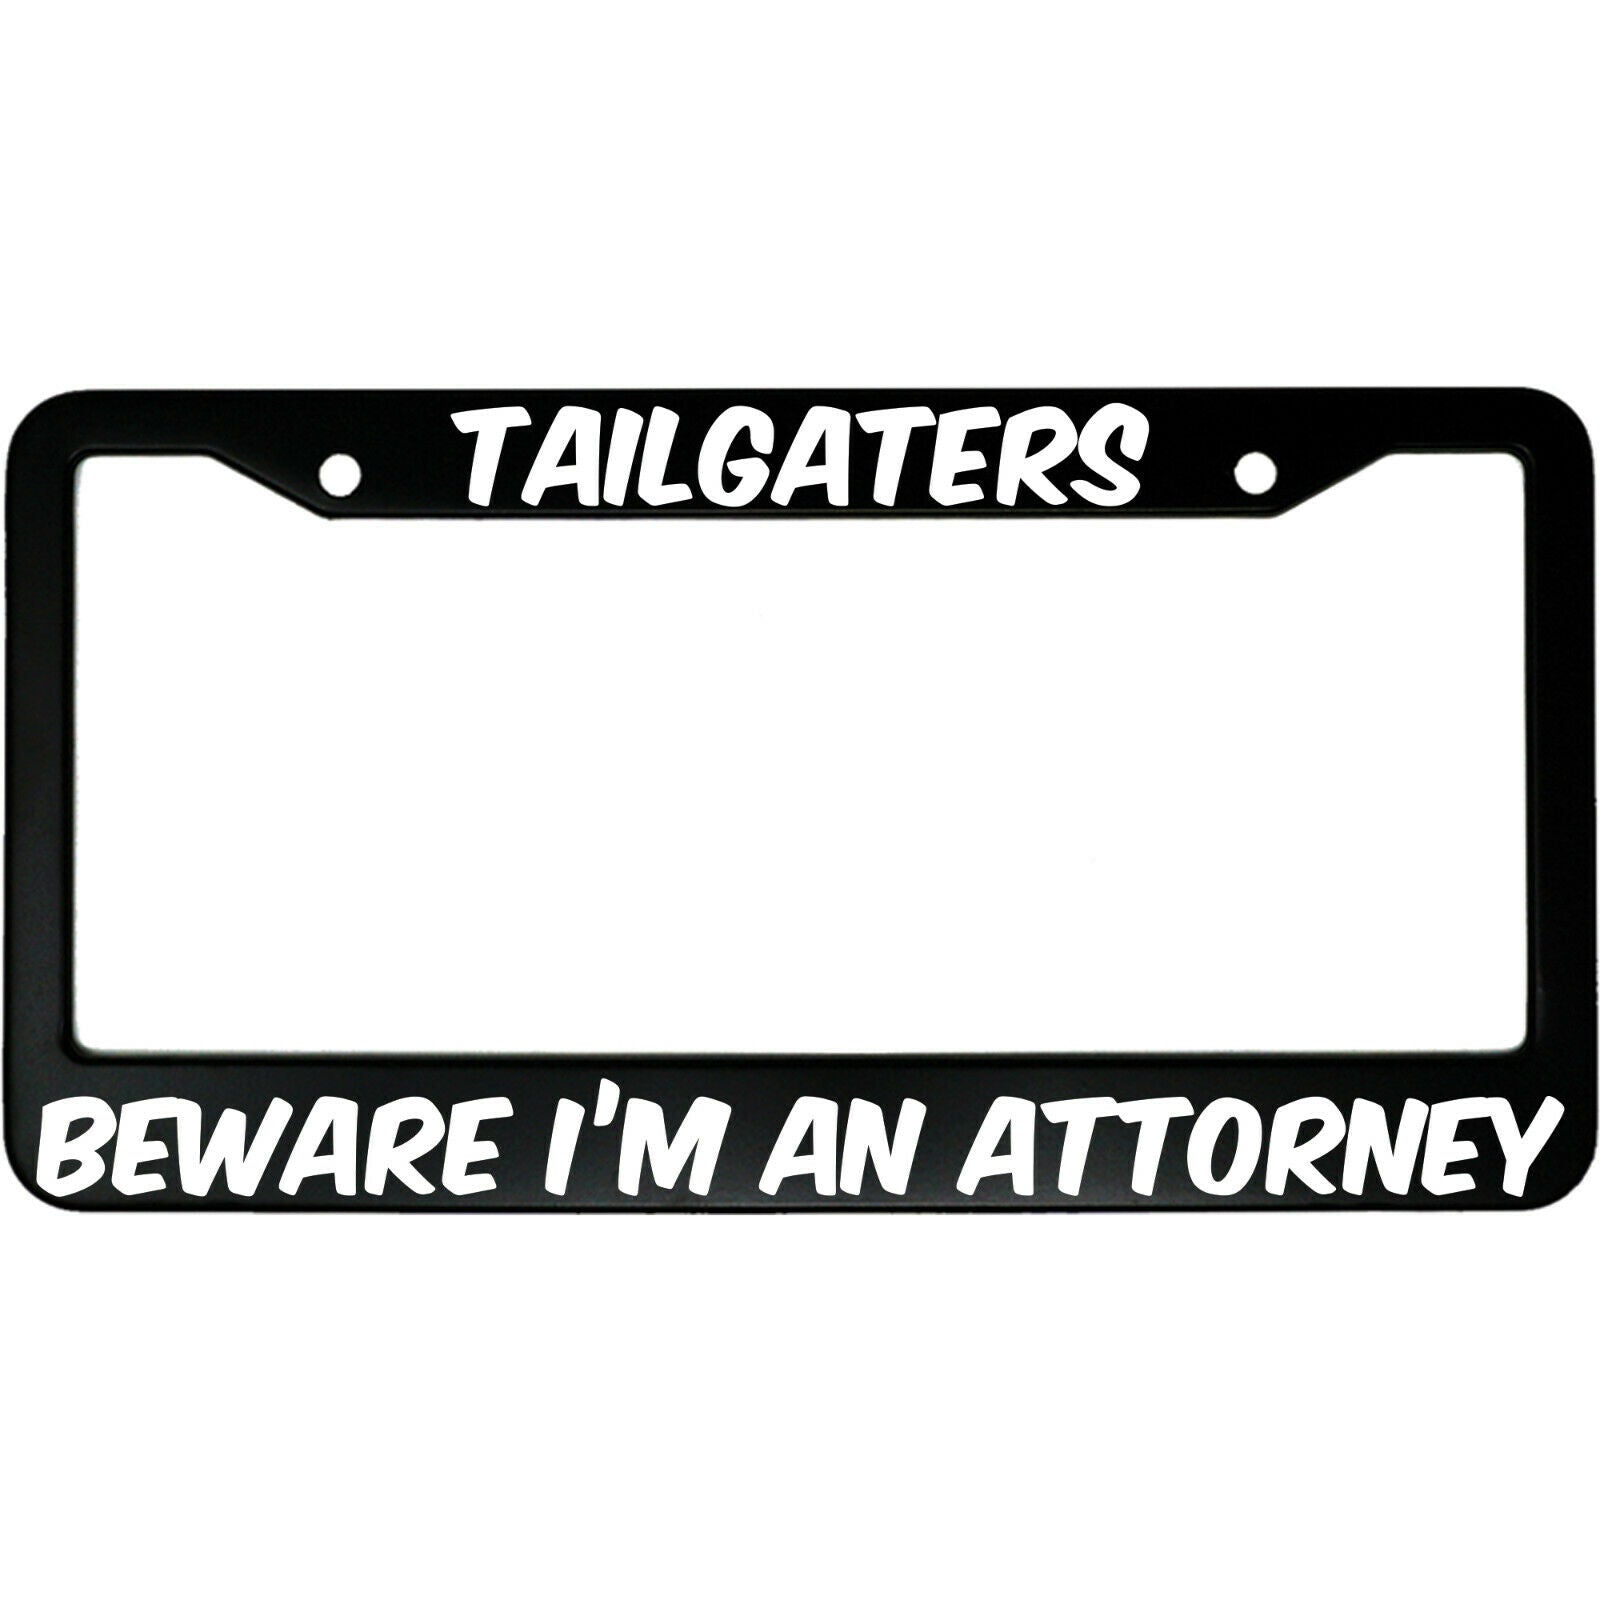 Tailergaters Beware I'm An Attorney